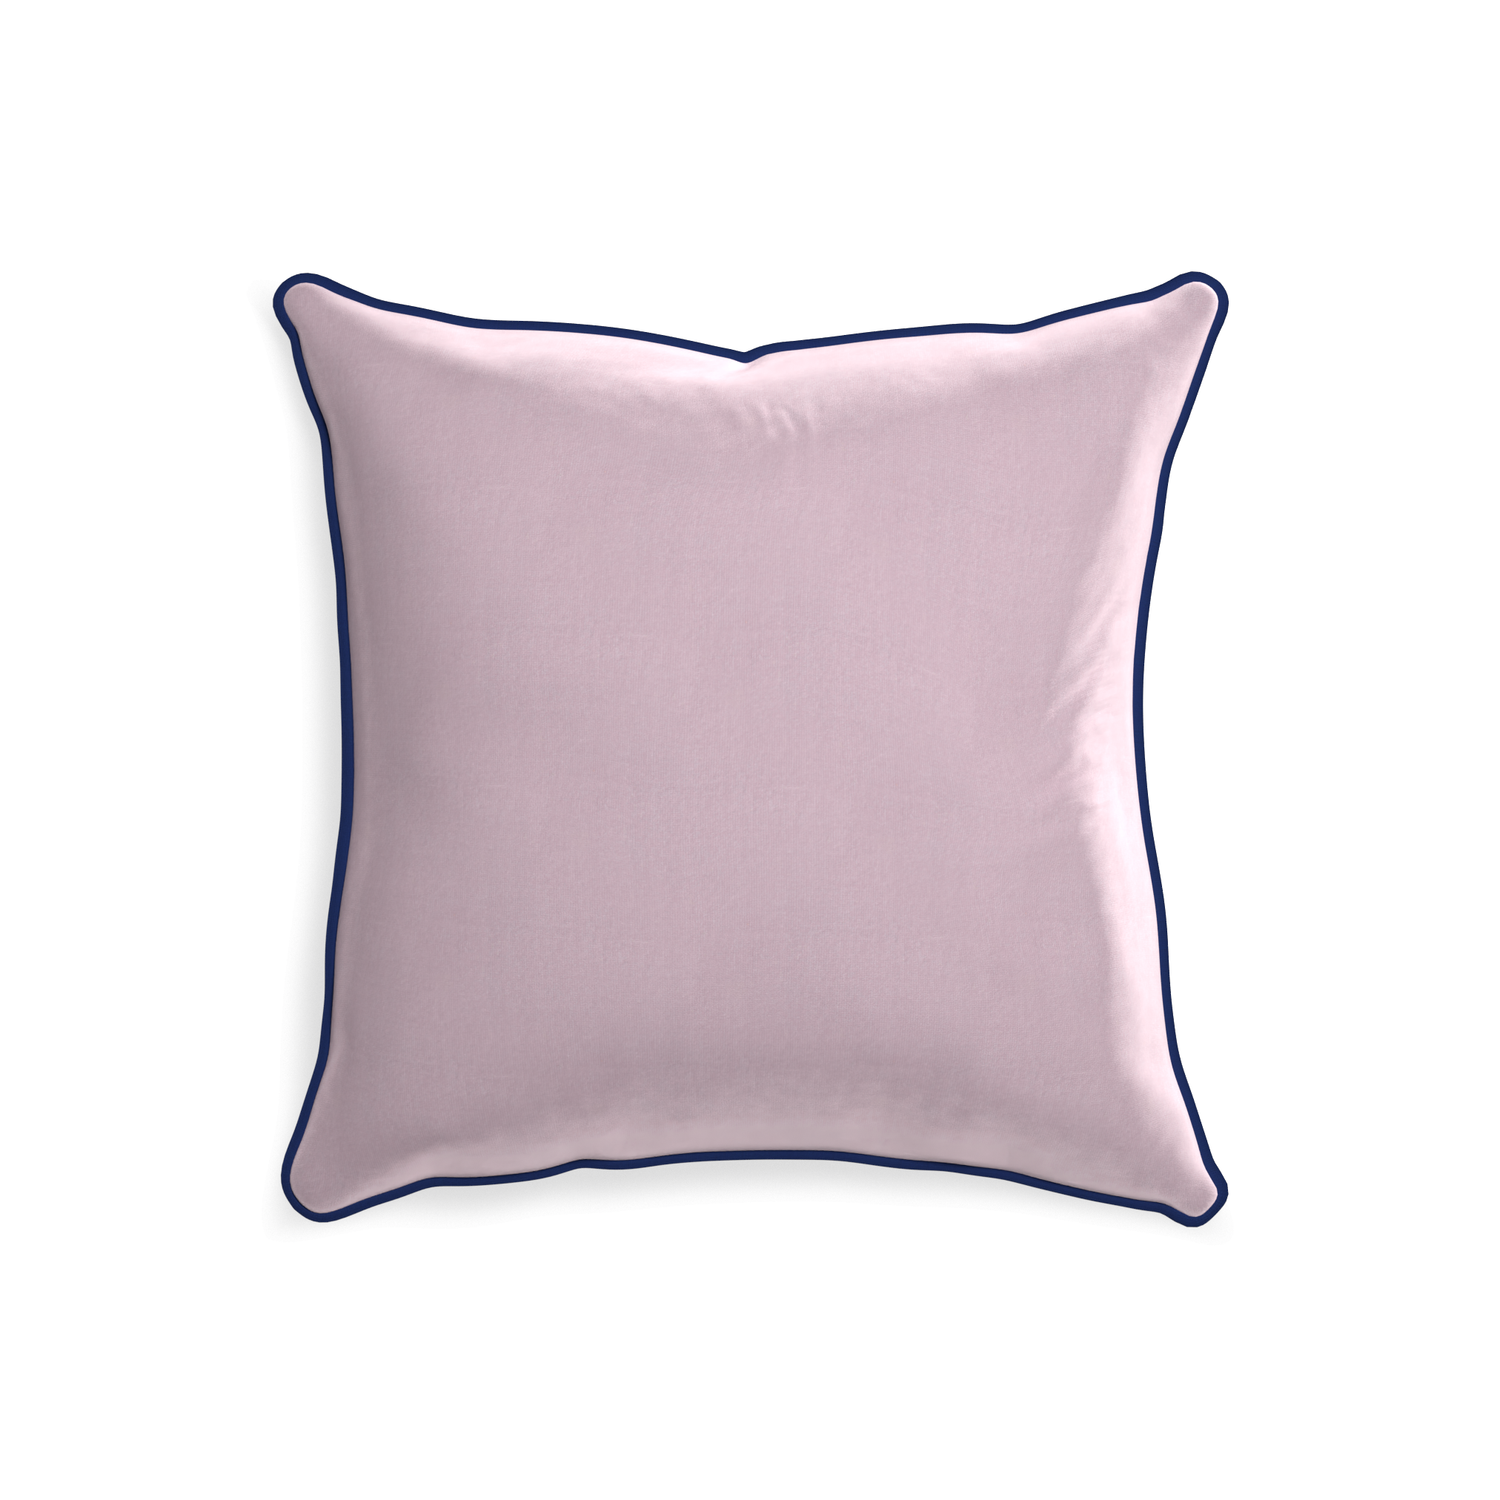 20-square lilac velvet custom lilacpillow with midnight piping on white background